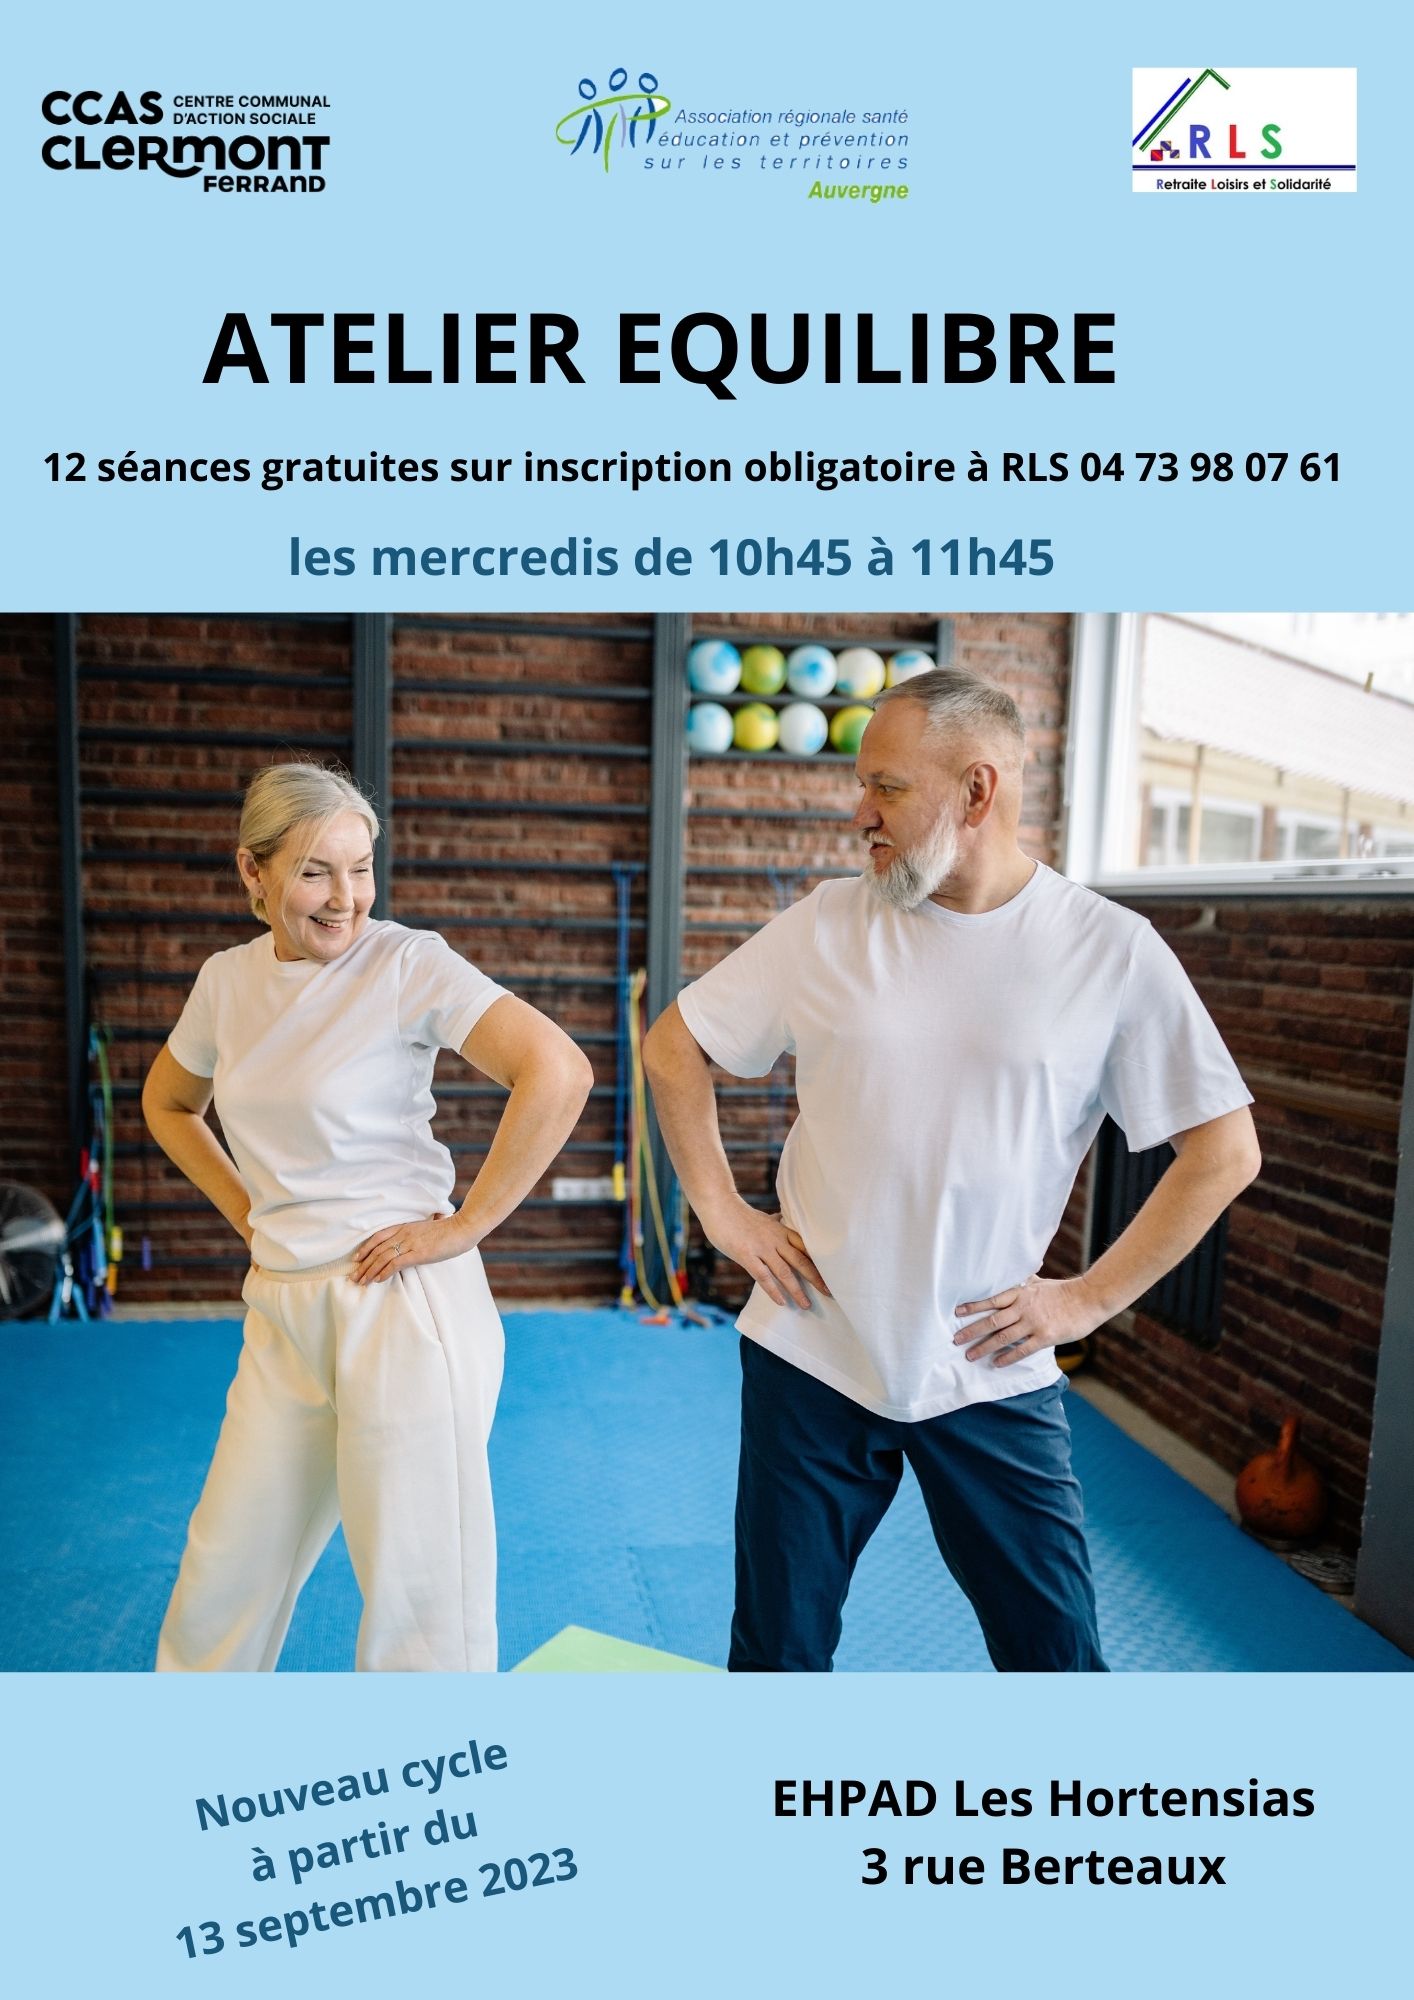 ATELIER EQUILIBRE hort